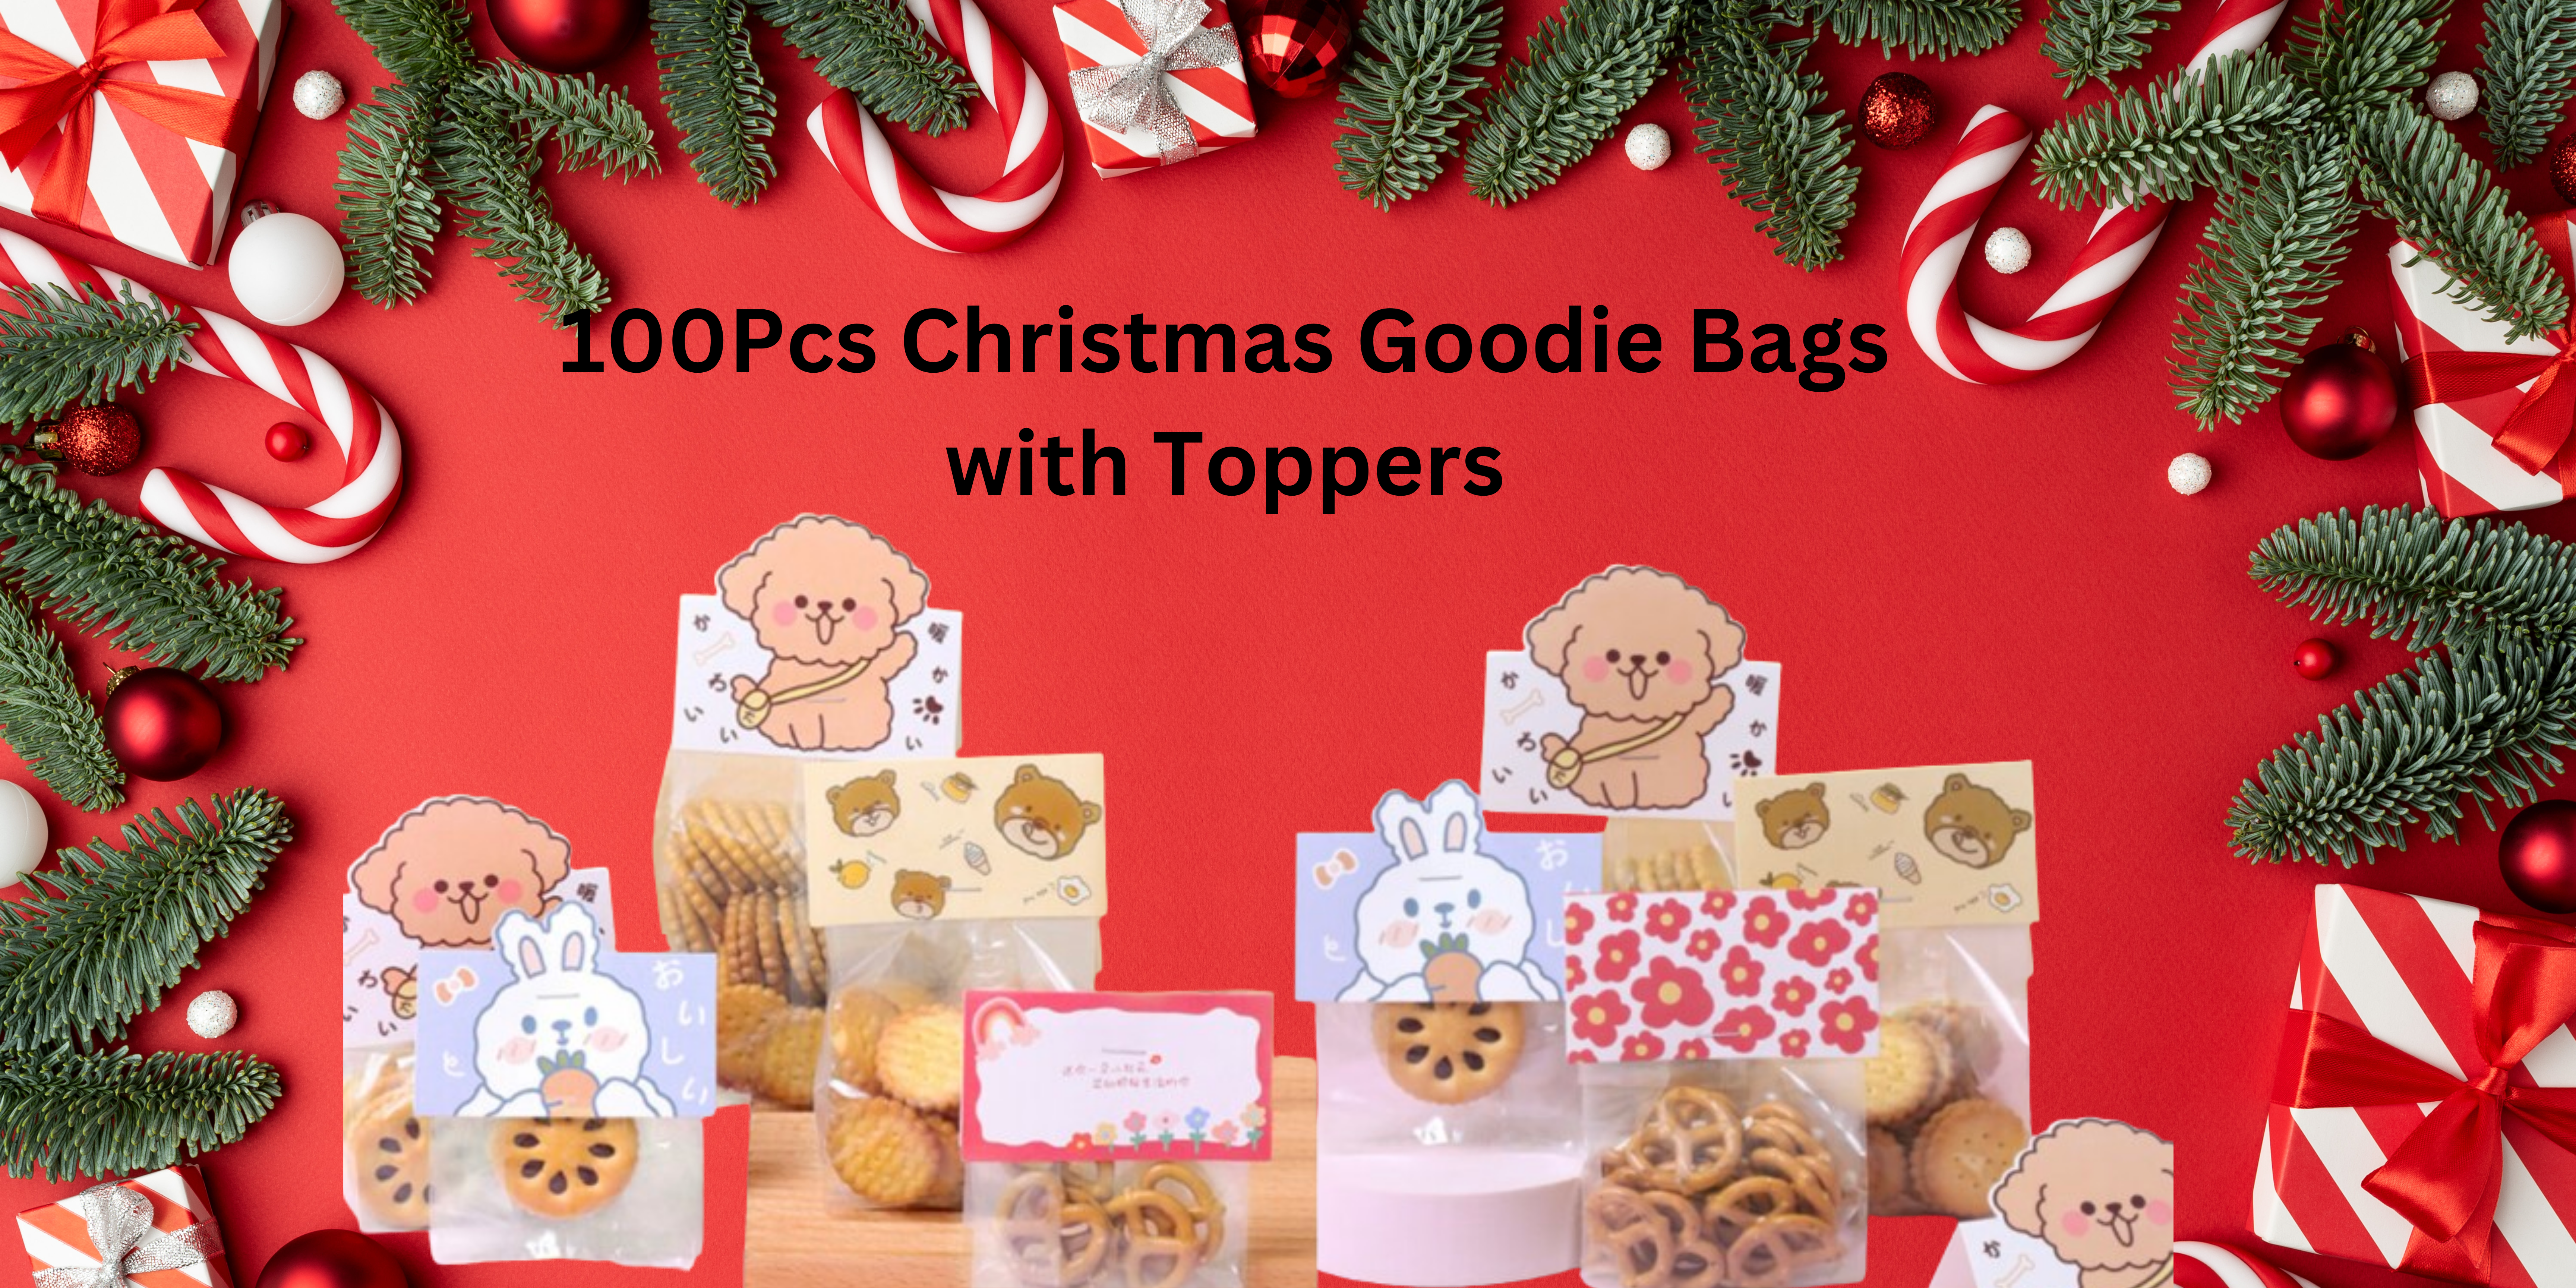 100Pcs Christmas Goodie Bags with Toppers Magic Reindeer Food Candy Cello Bags Plastic Xmas Party Favor Bags for Wrapping Baking Food